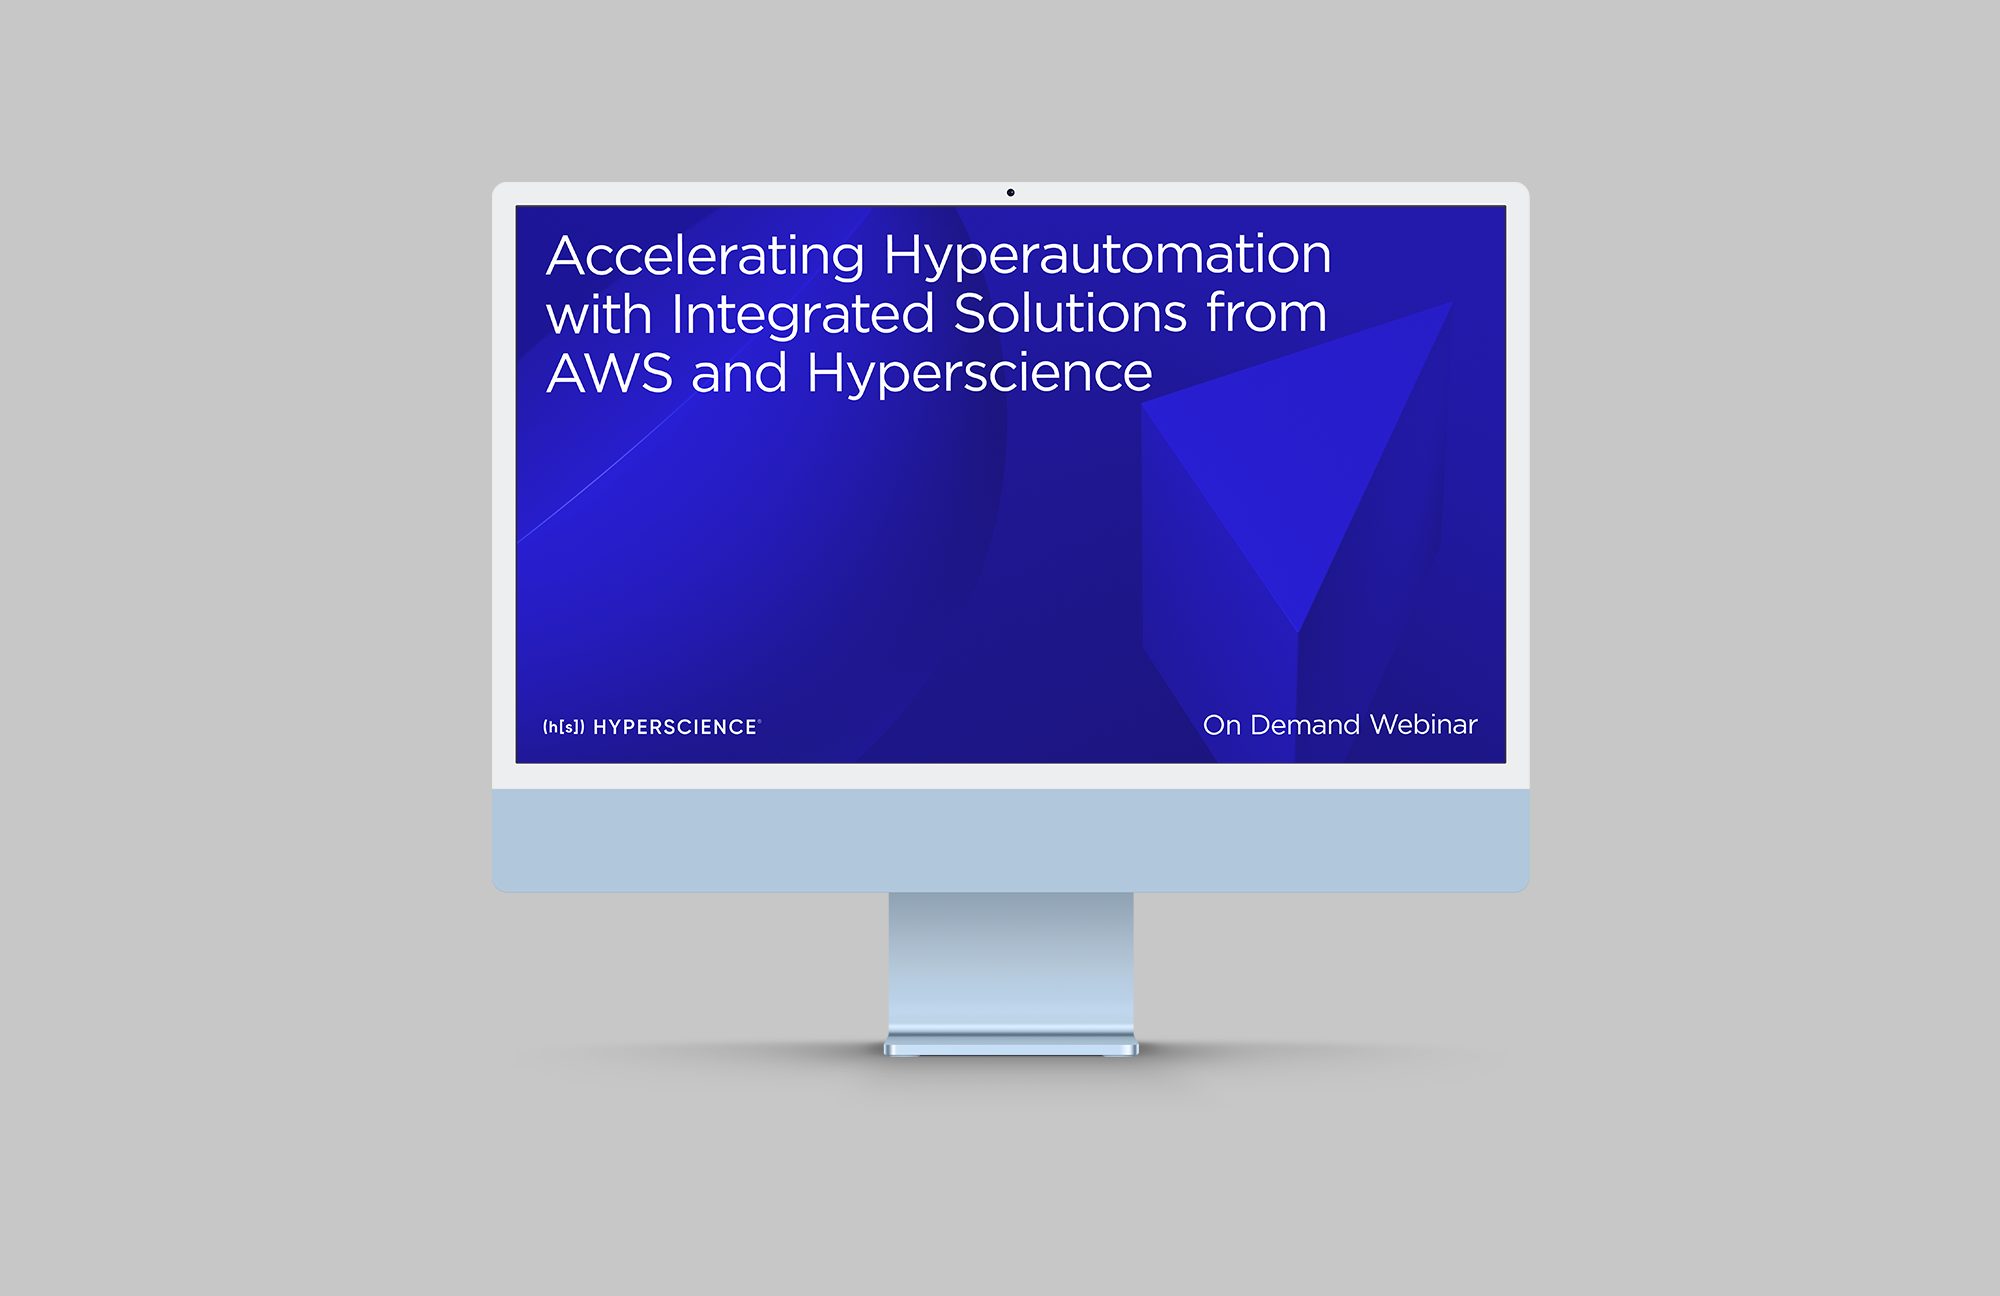 Accelerating Hyperautomation with Integrated Solutions from AWS and Hyperscience